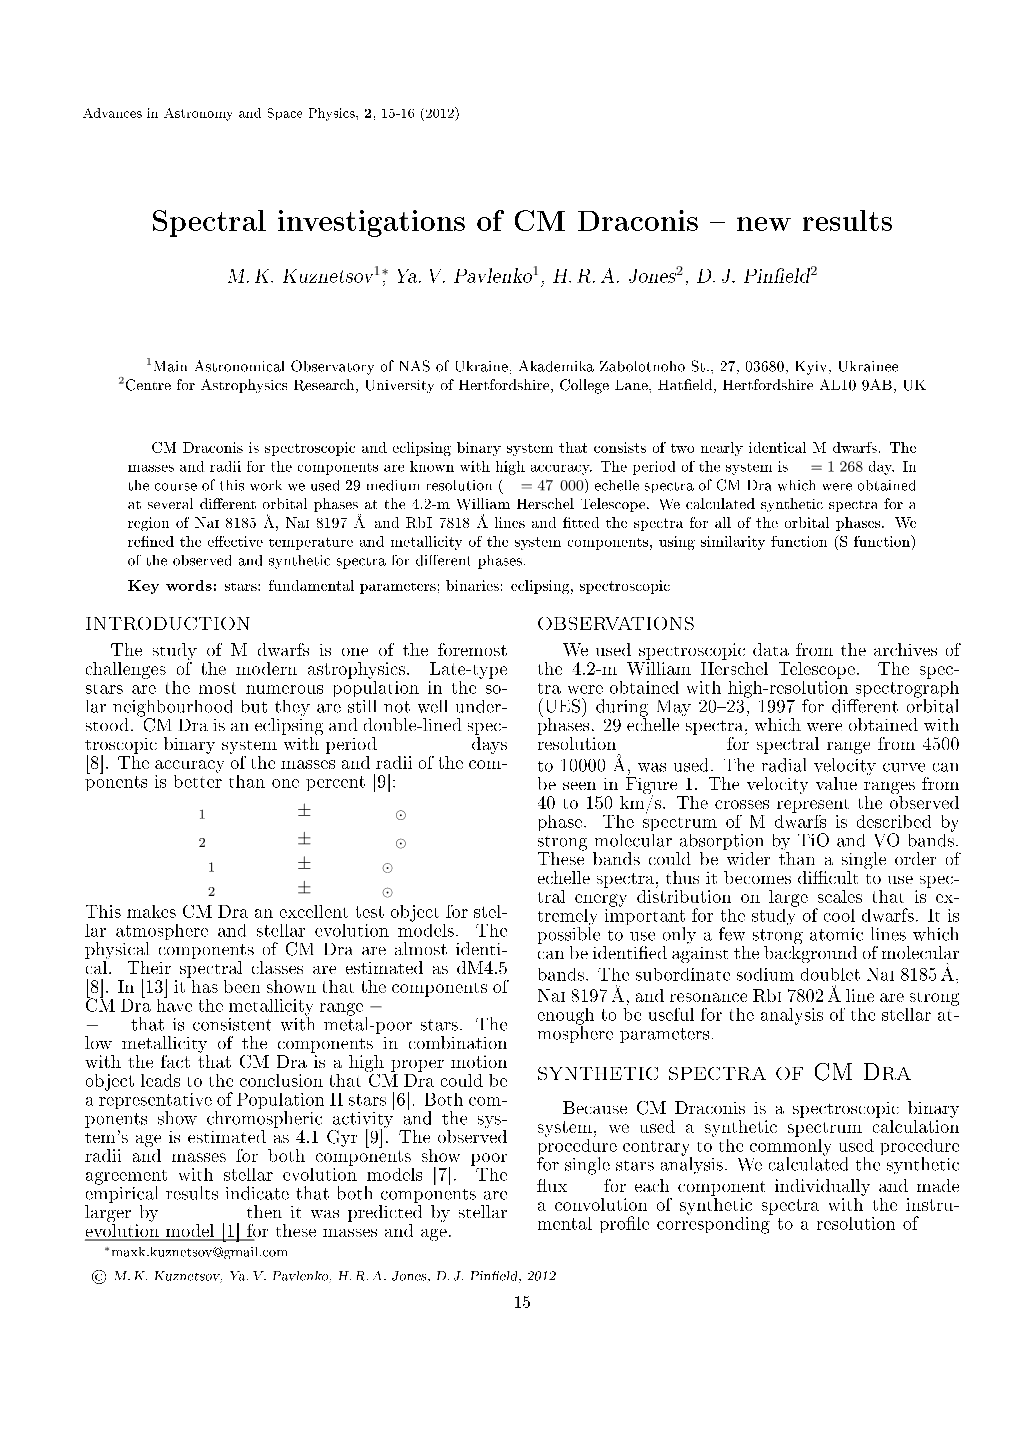 Spectral Investigations of CM Draconis New Results